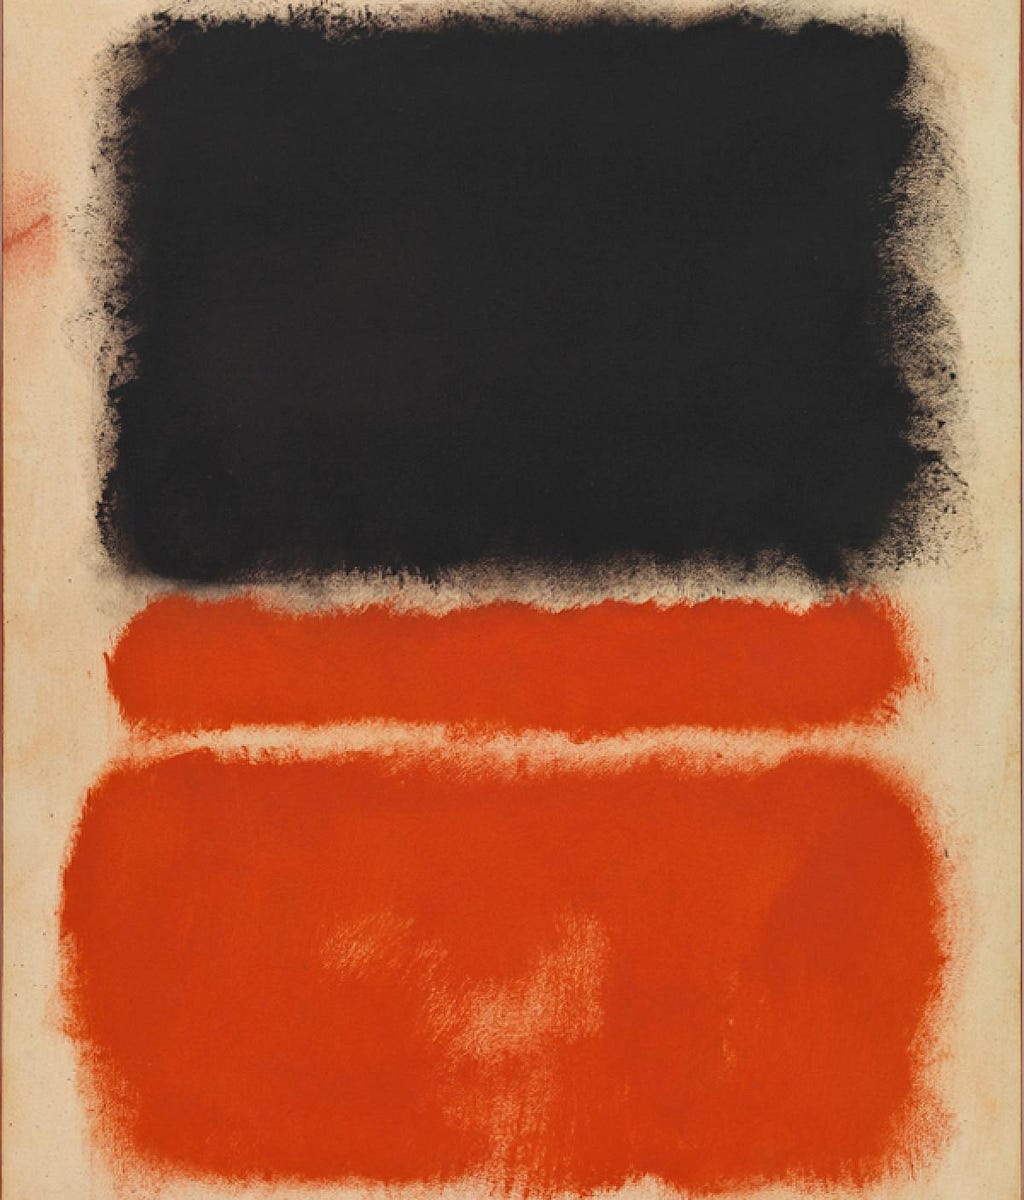 “Red” (1968) by Mark Rothko